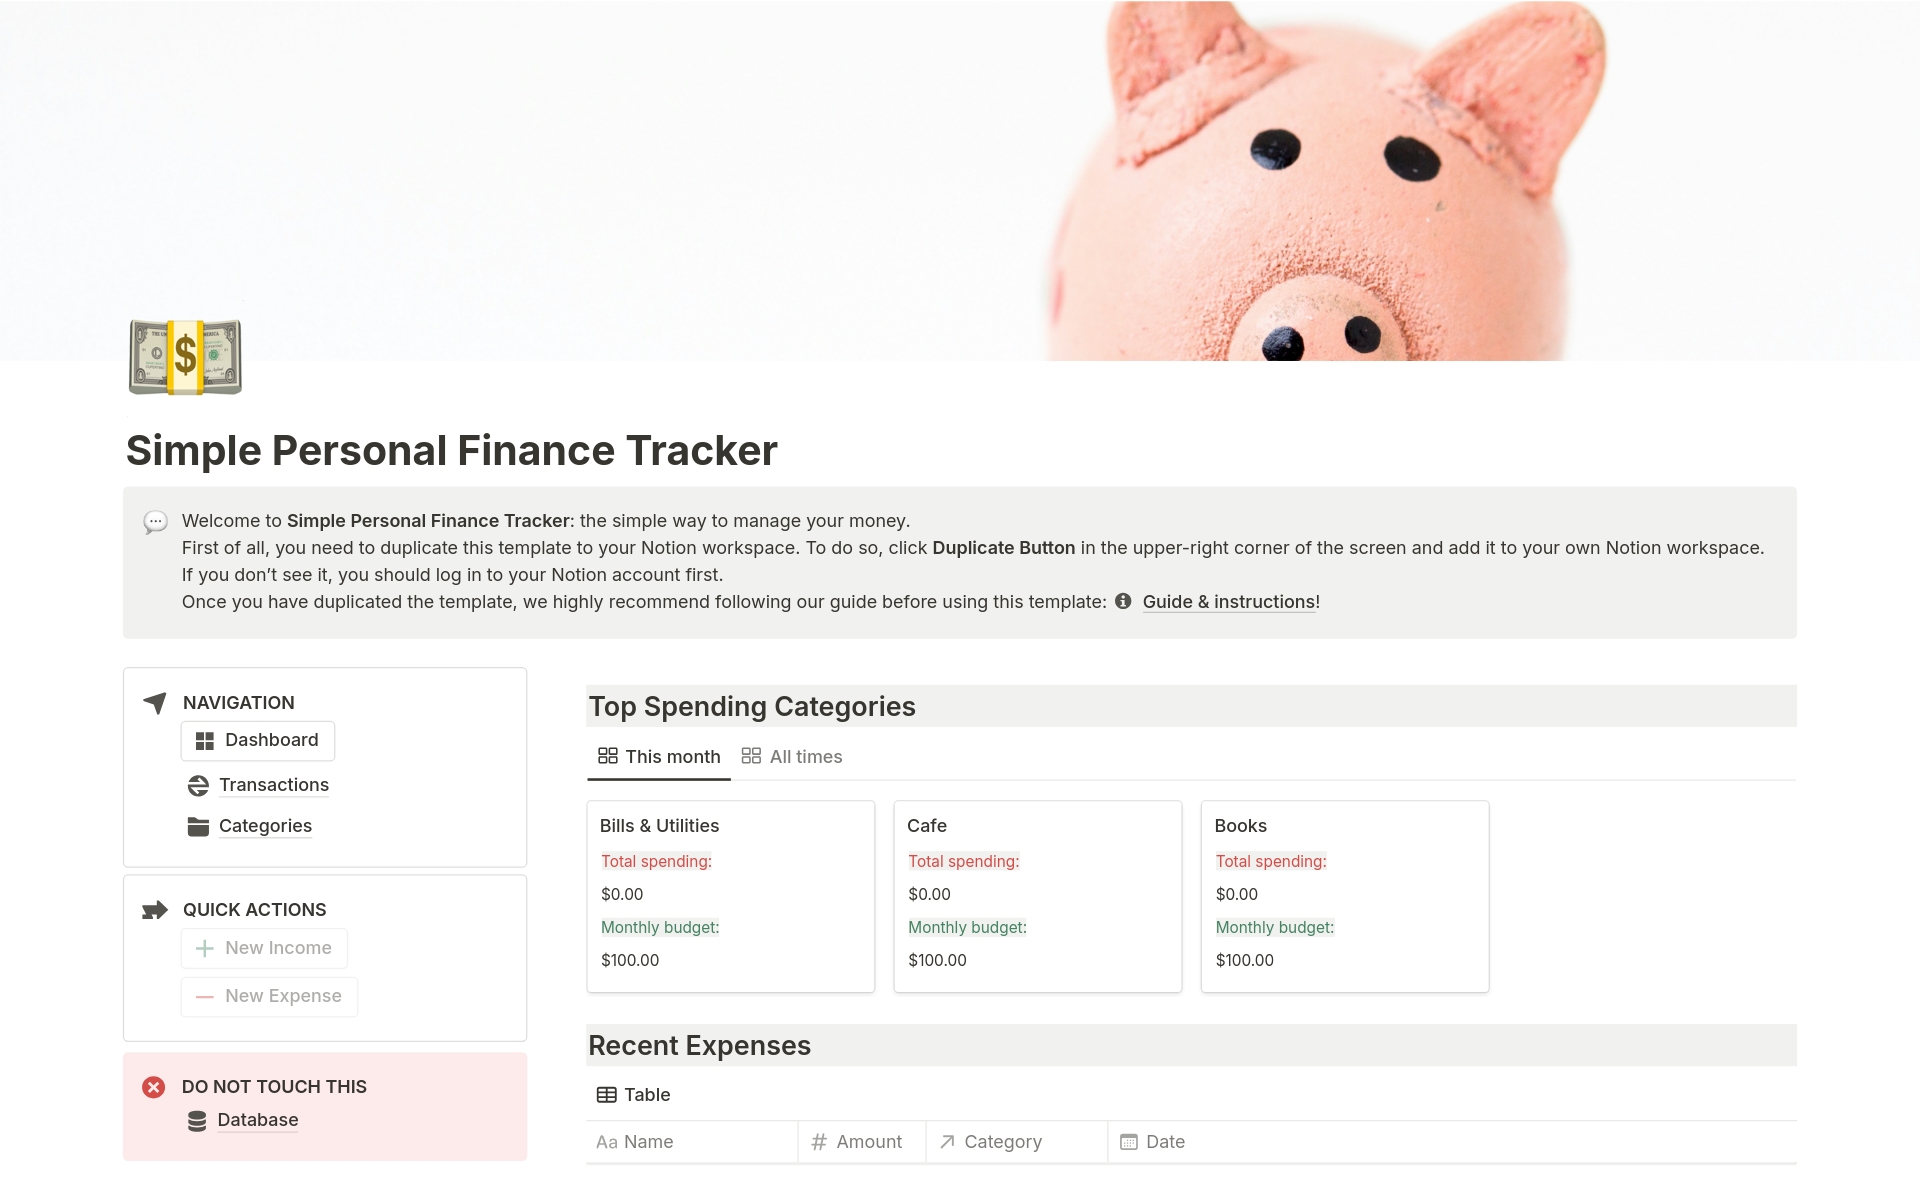 Take Control of Your Finances with the Simple Personal Finance Tracker for Notion. Perfect for anyone looking to gain a clearer understanding of their financial health without the complexity of traditional finance software.